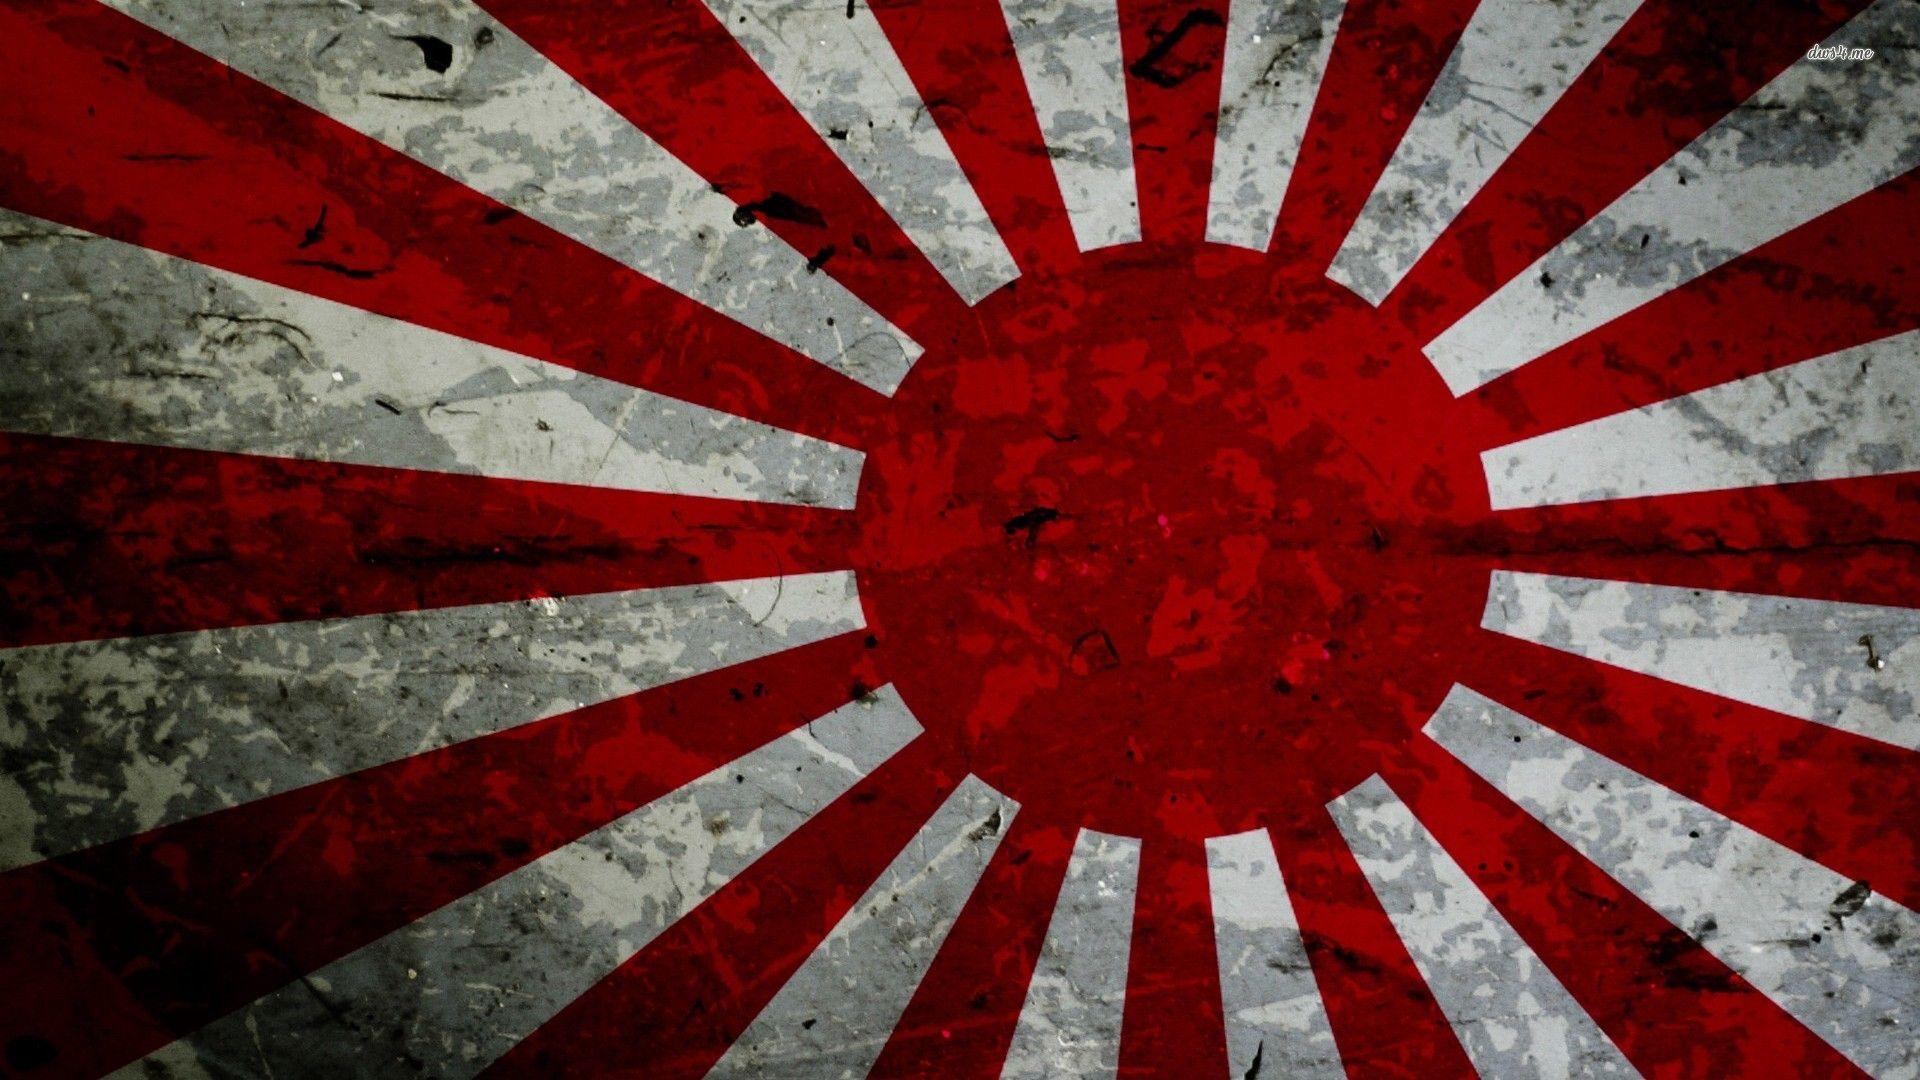 Japan World War Two Wallpapers Top Free Japan World War Two Images, Photos, Reviews